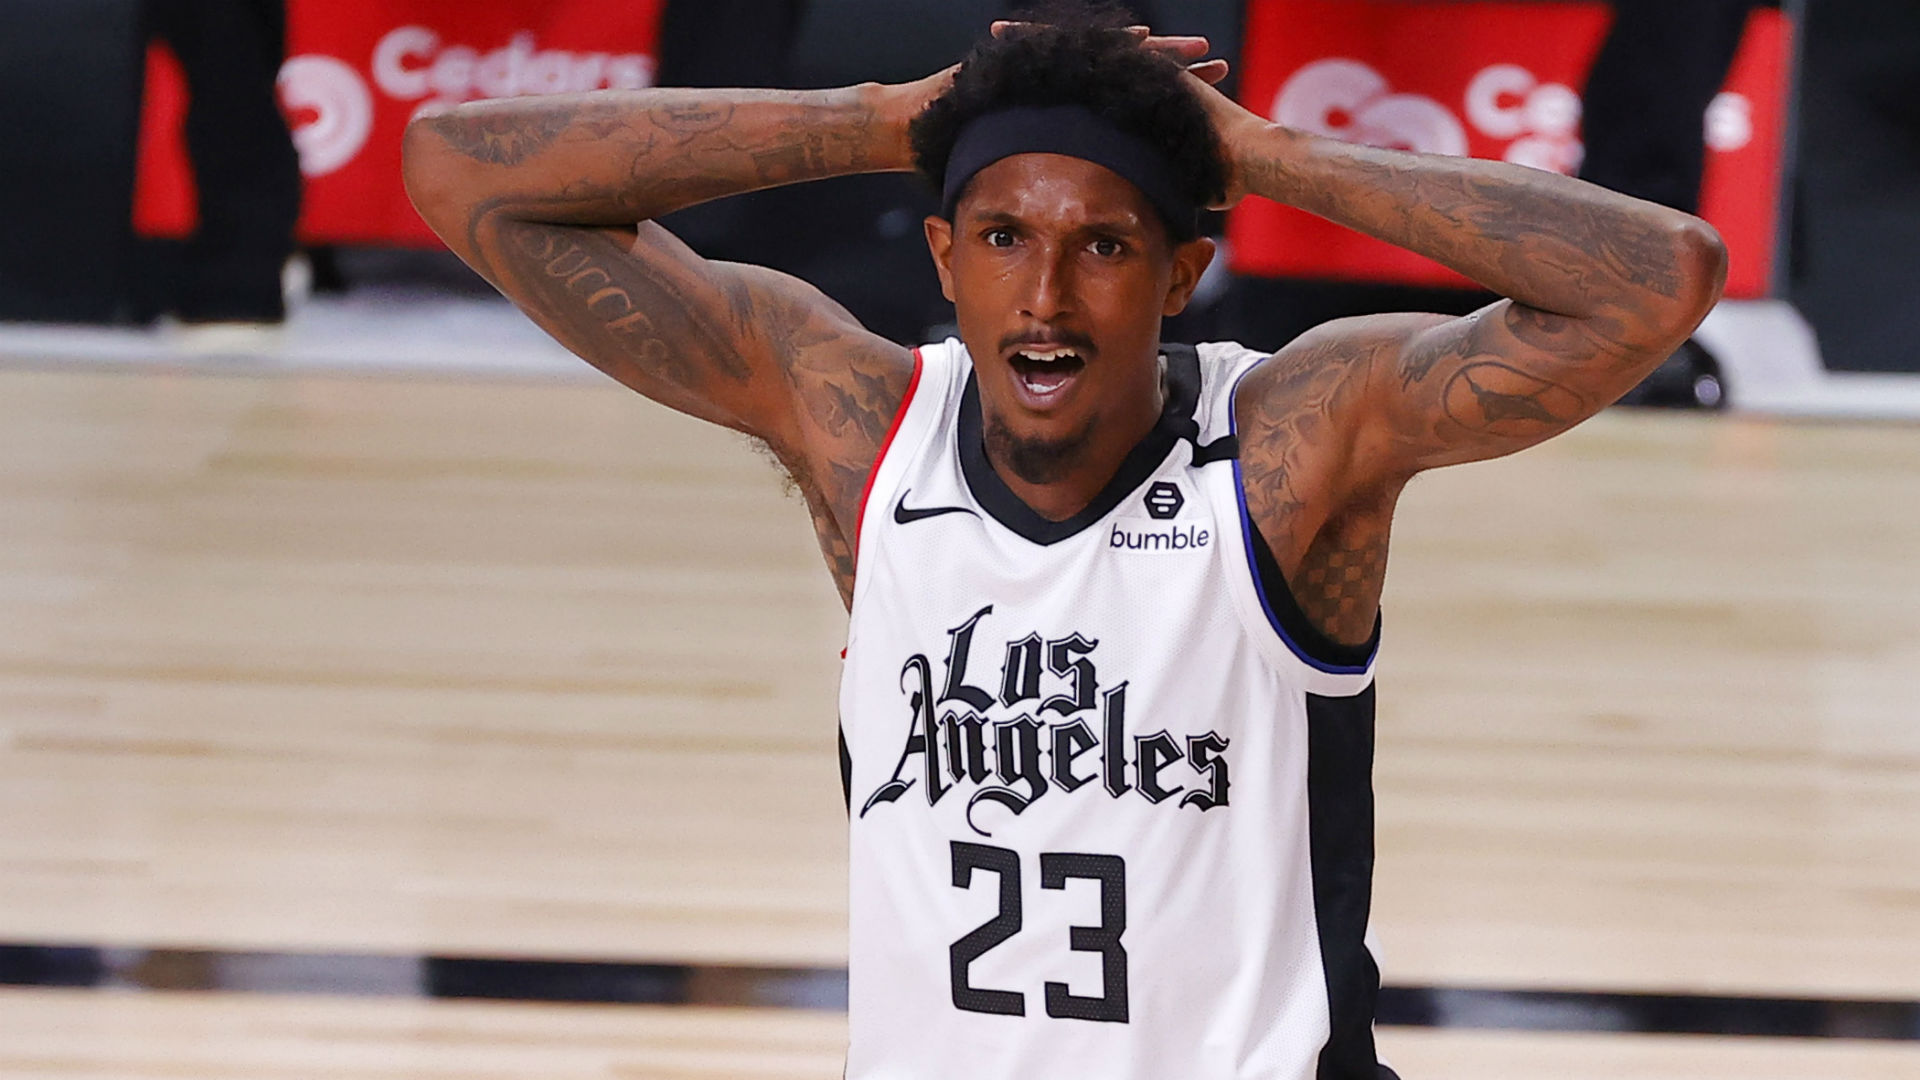 Speaking after his first game back since the NBA resumed, Lou Williams addressed his visit to a strip club in Atlanta.